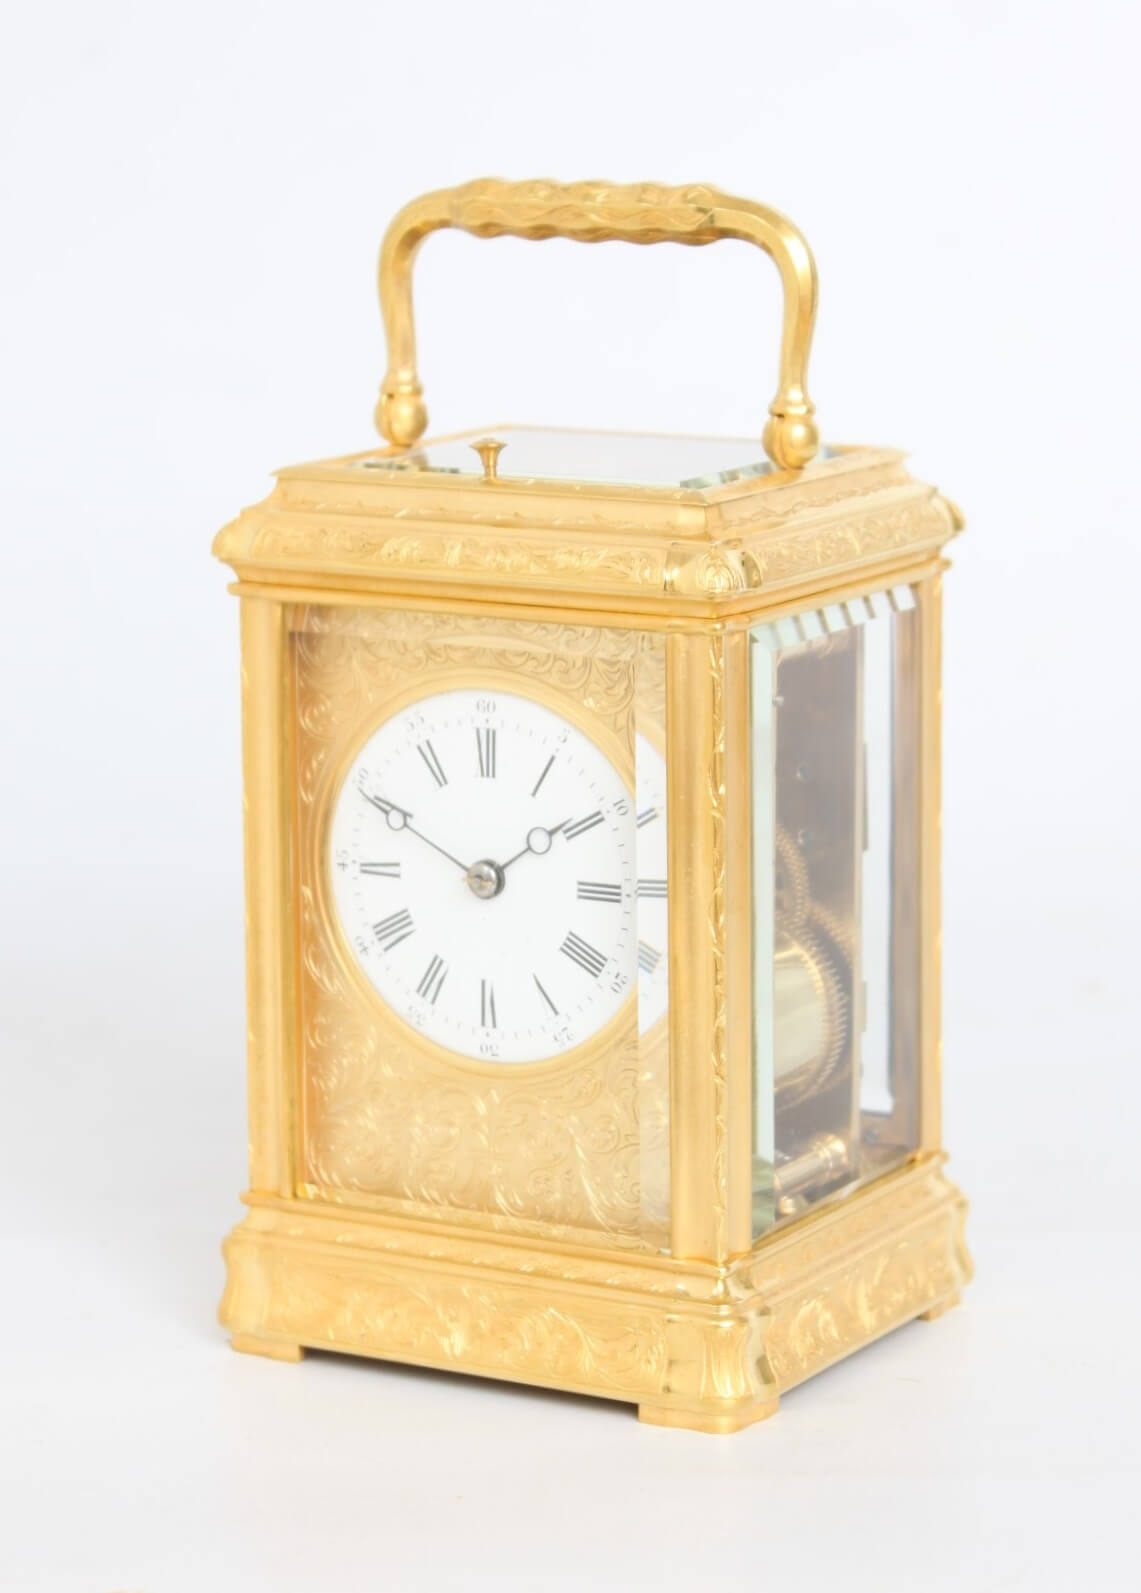 French-gilt brass-engraved-carriage clock-antique clock-striking-repeating-travel clock